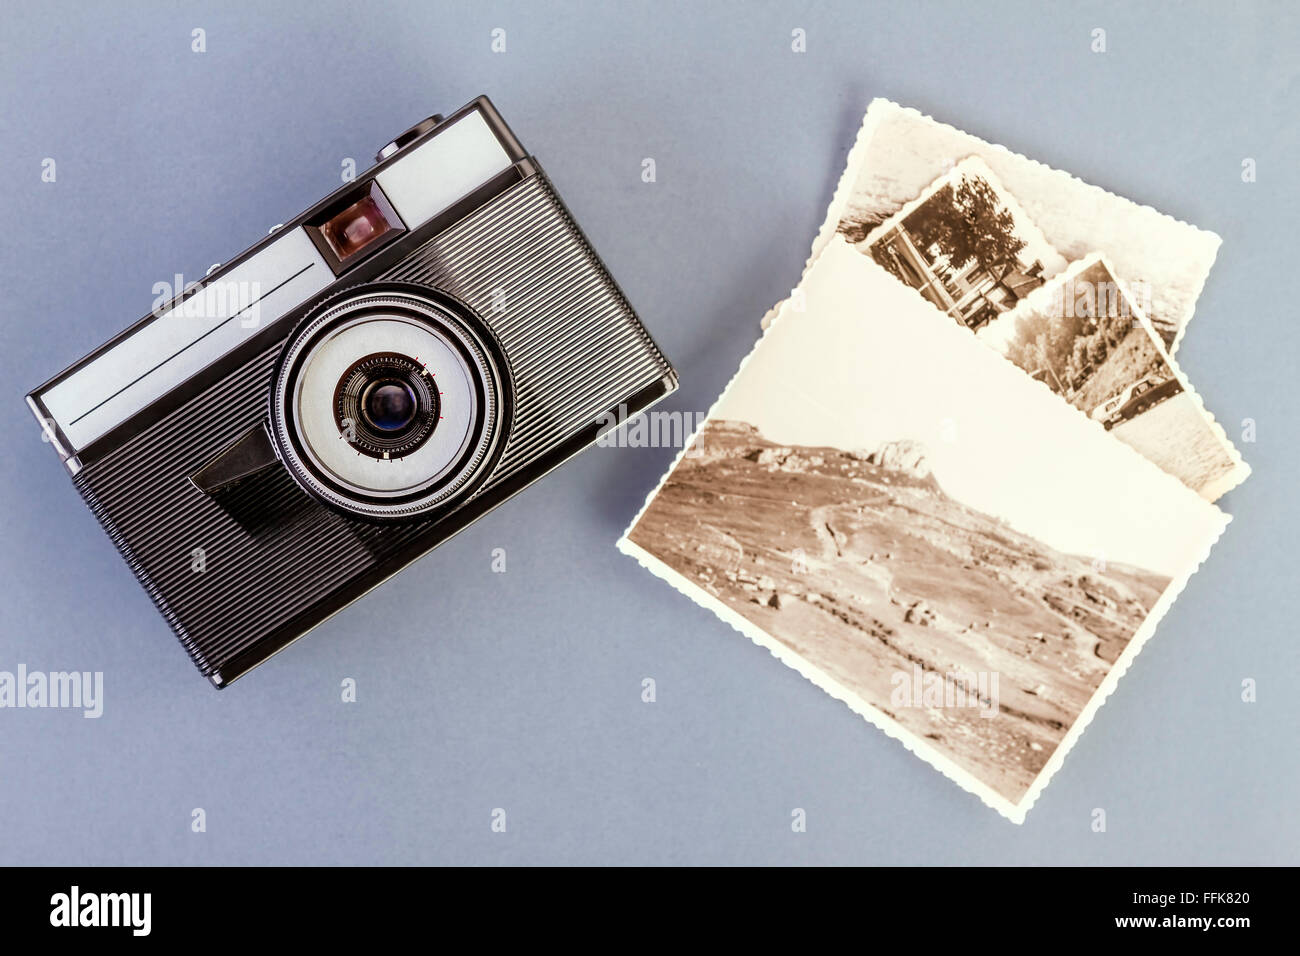 Vintage photo camera and old photos on a gray table Stock Photo